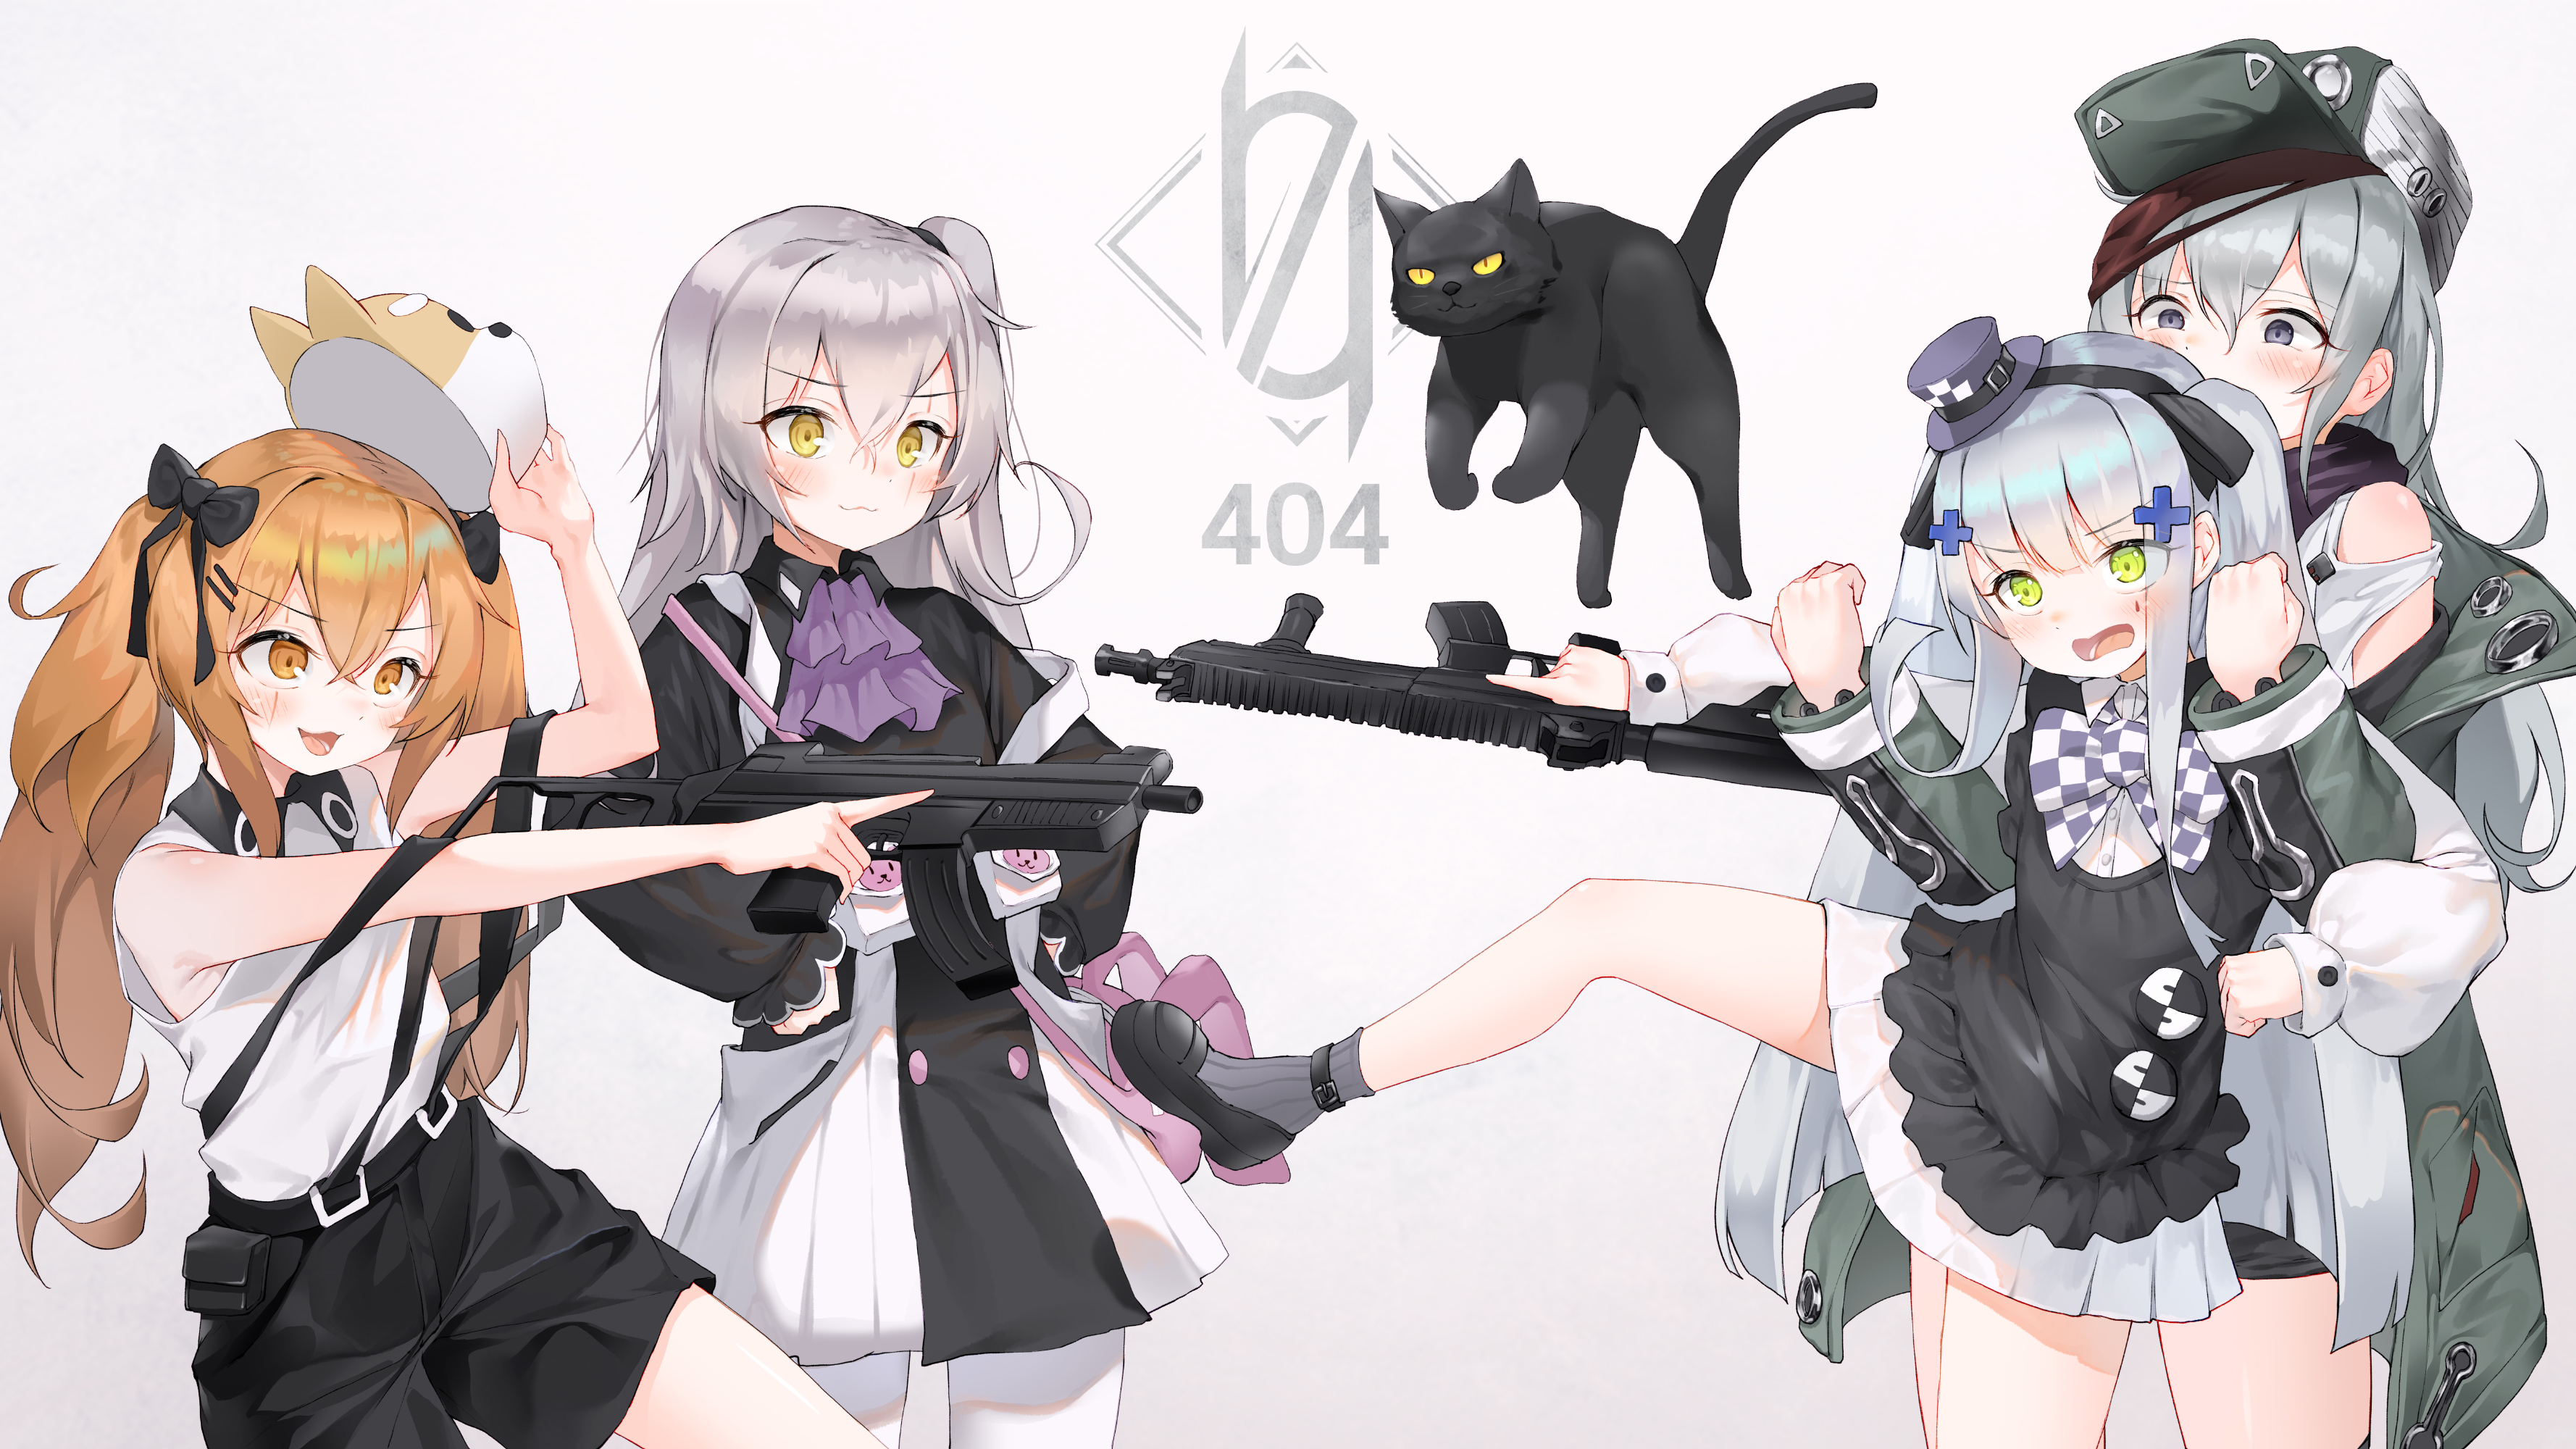 Frontline G11 and HK416 Wallpapers